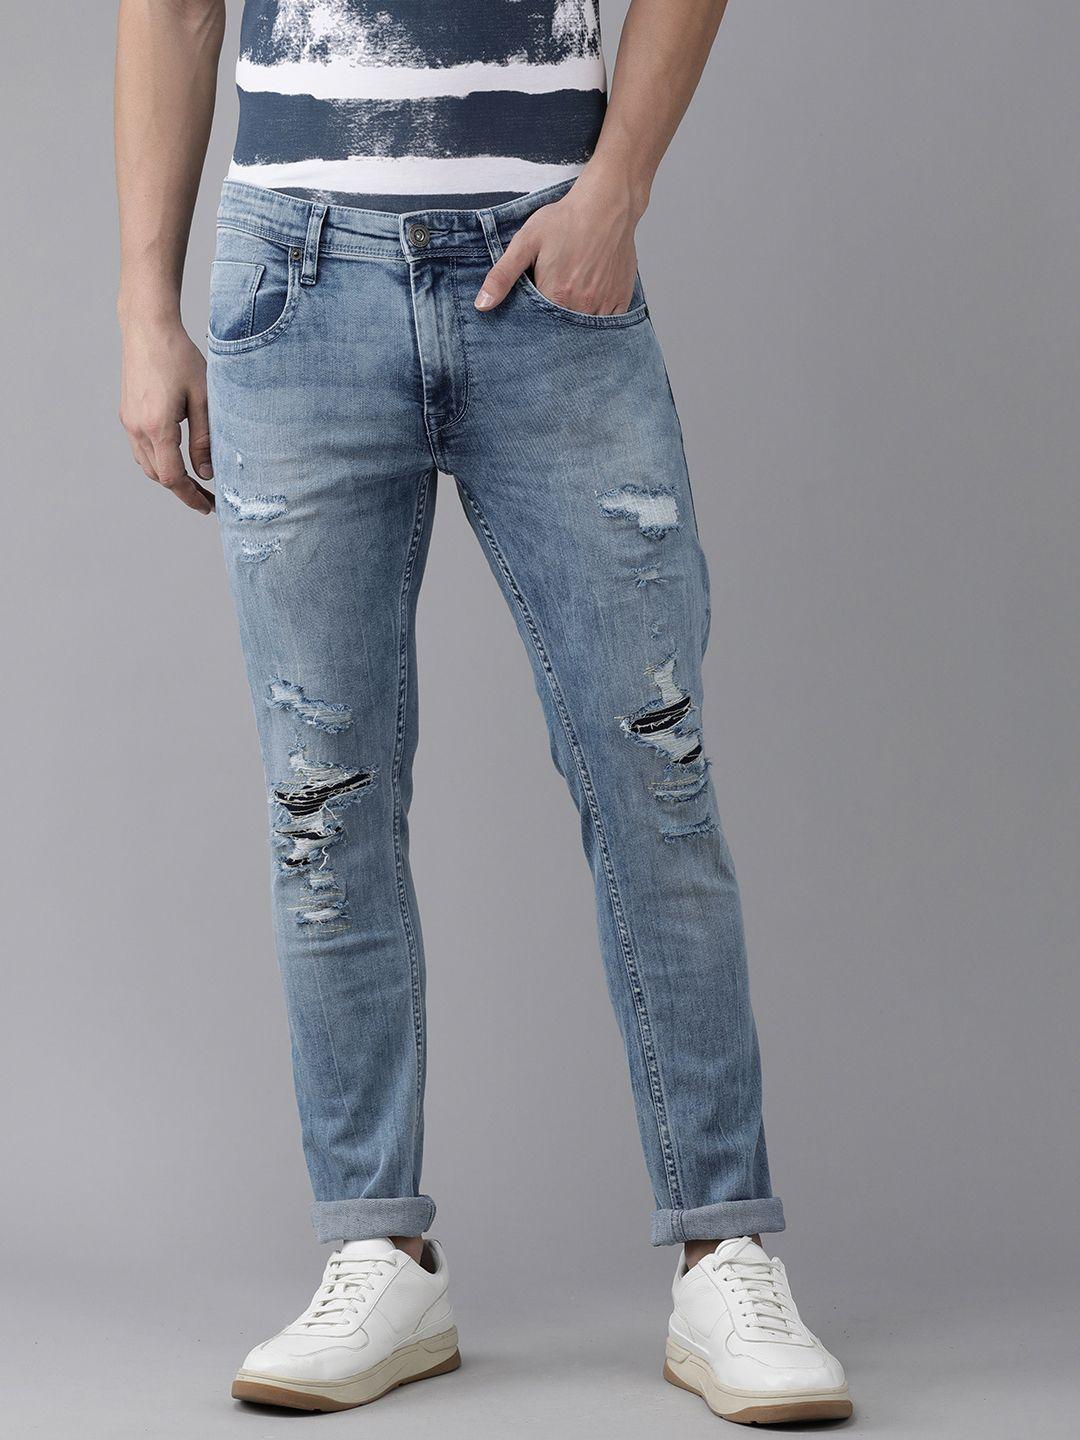 beat london by pepe jeans men blue mildly distressed light fade stretchable jeans